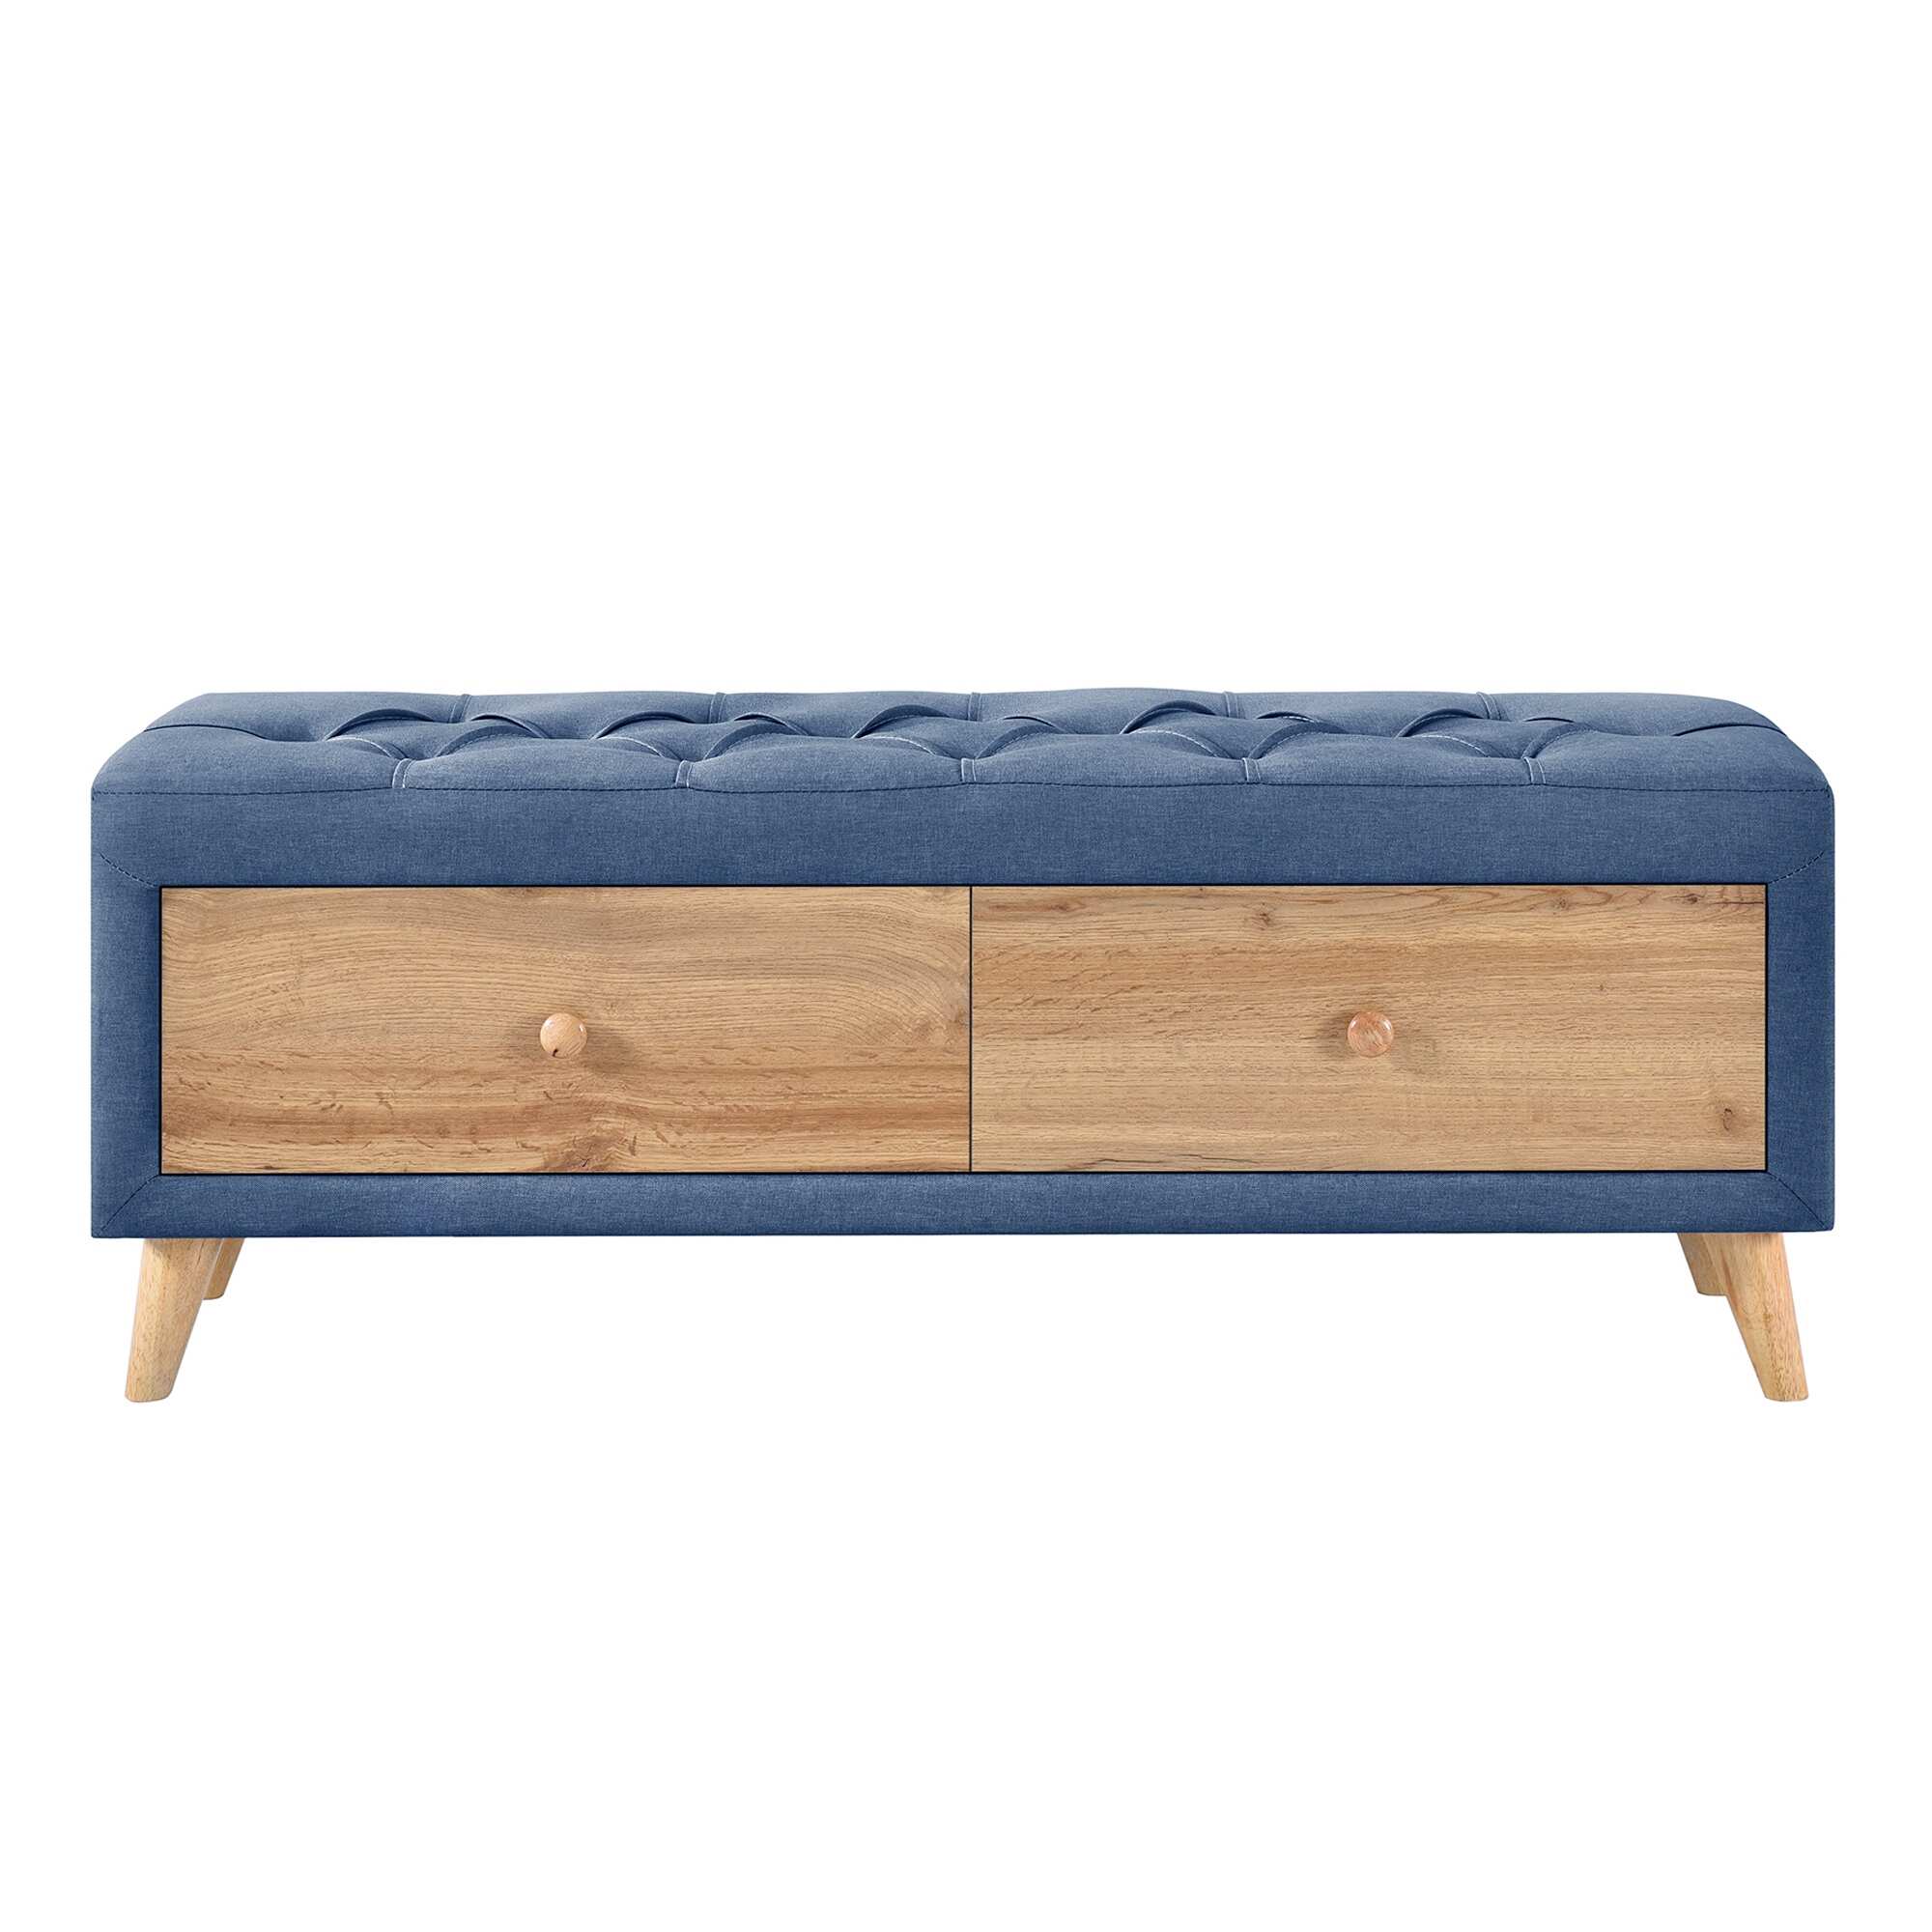 Upholstered Wooden Storage Qttoman Bench with 2 Drawers